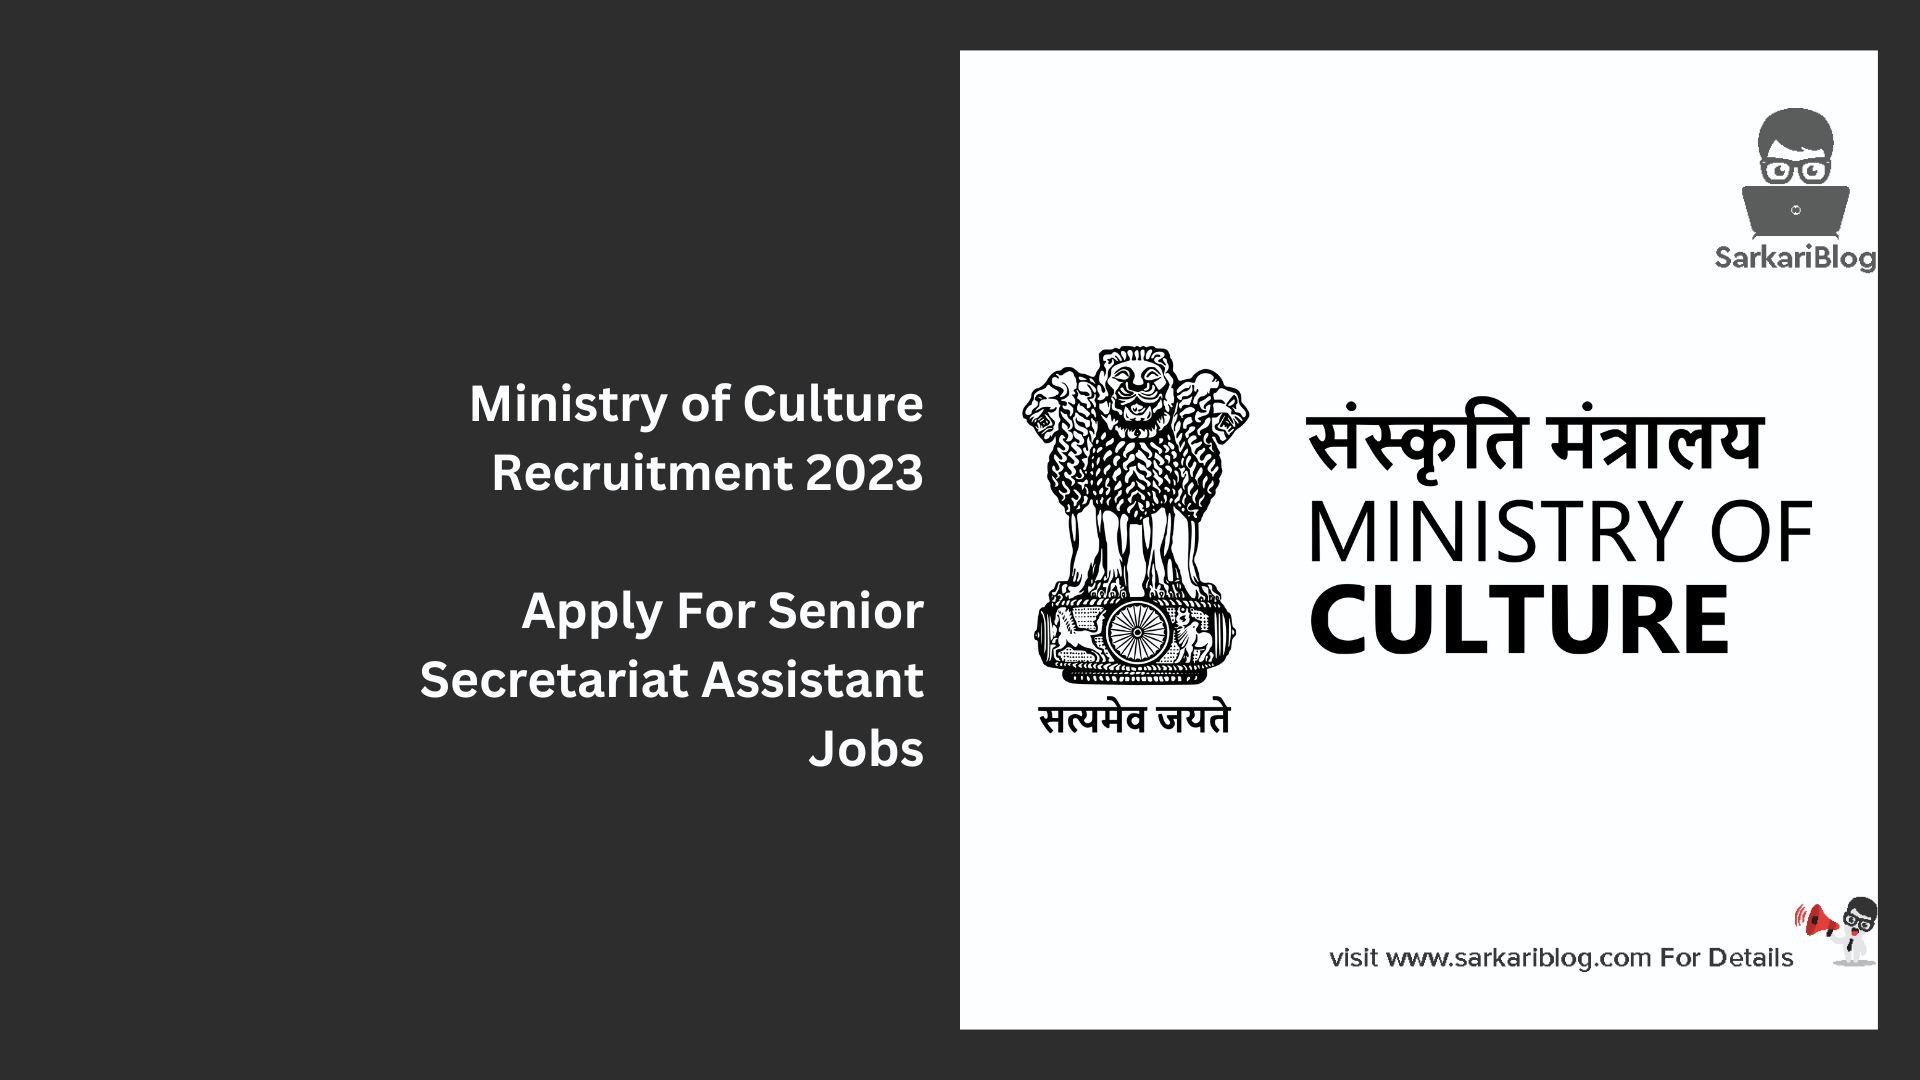 Ministry of Culture Recruitment 2023